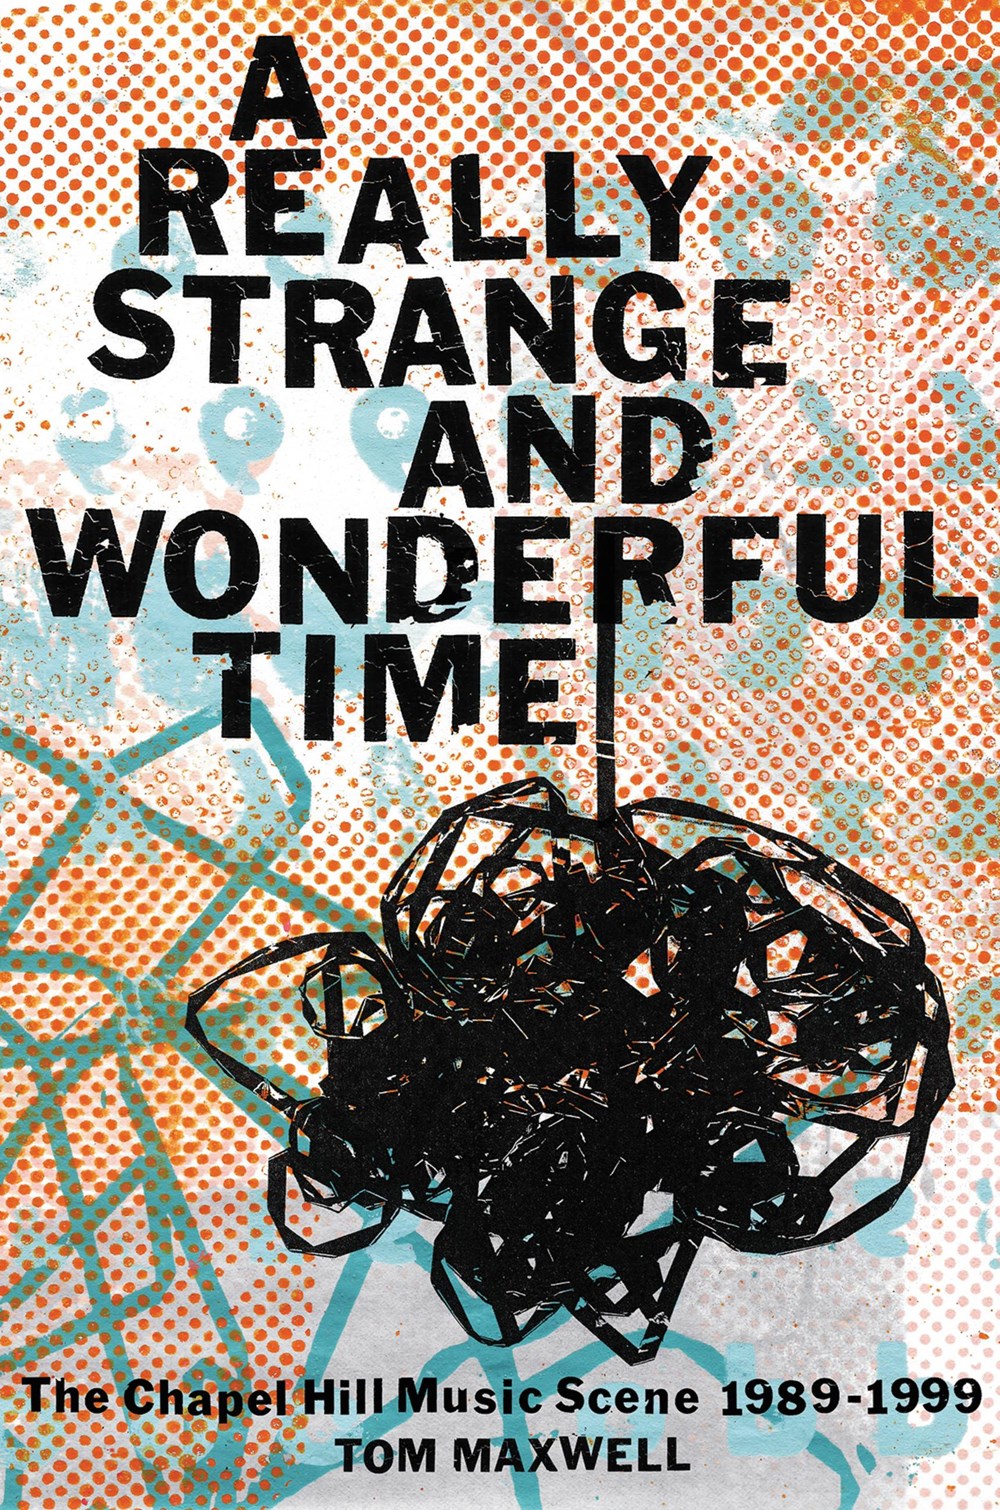 A Really Strange and Wonderful Time by Tom Maxwell